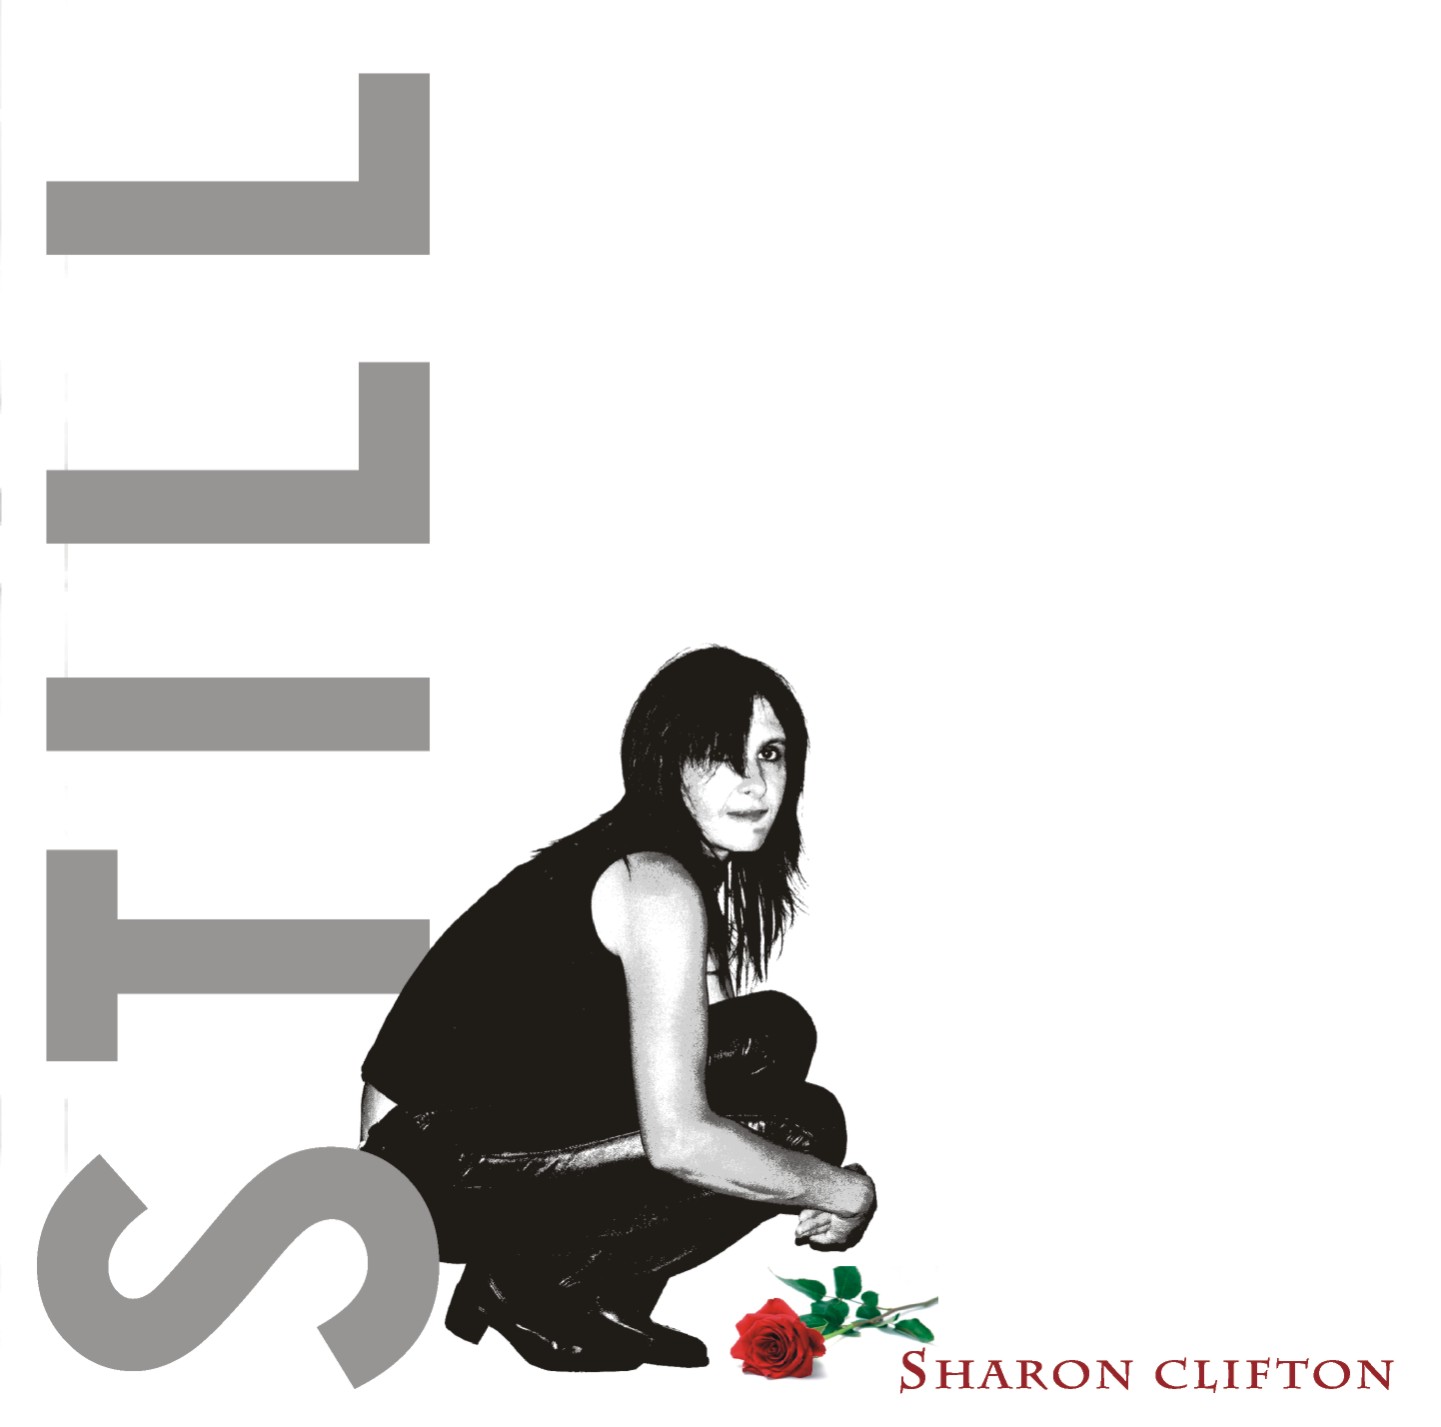 http://indiemusicpeople.com/uploads2/Sharon_Clifton_-_8299_Sharon_Clifton_CD_Covers_Front_Cover.jpg